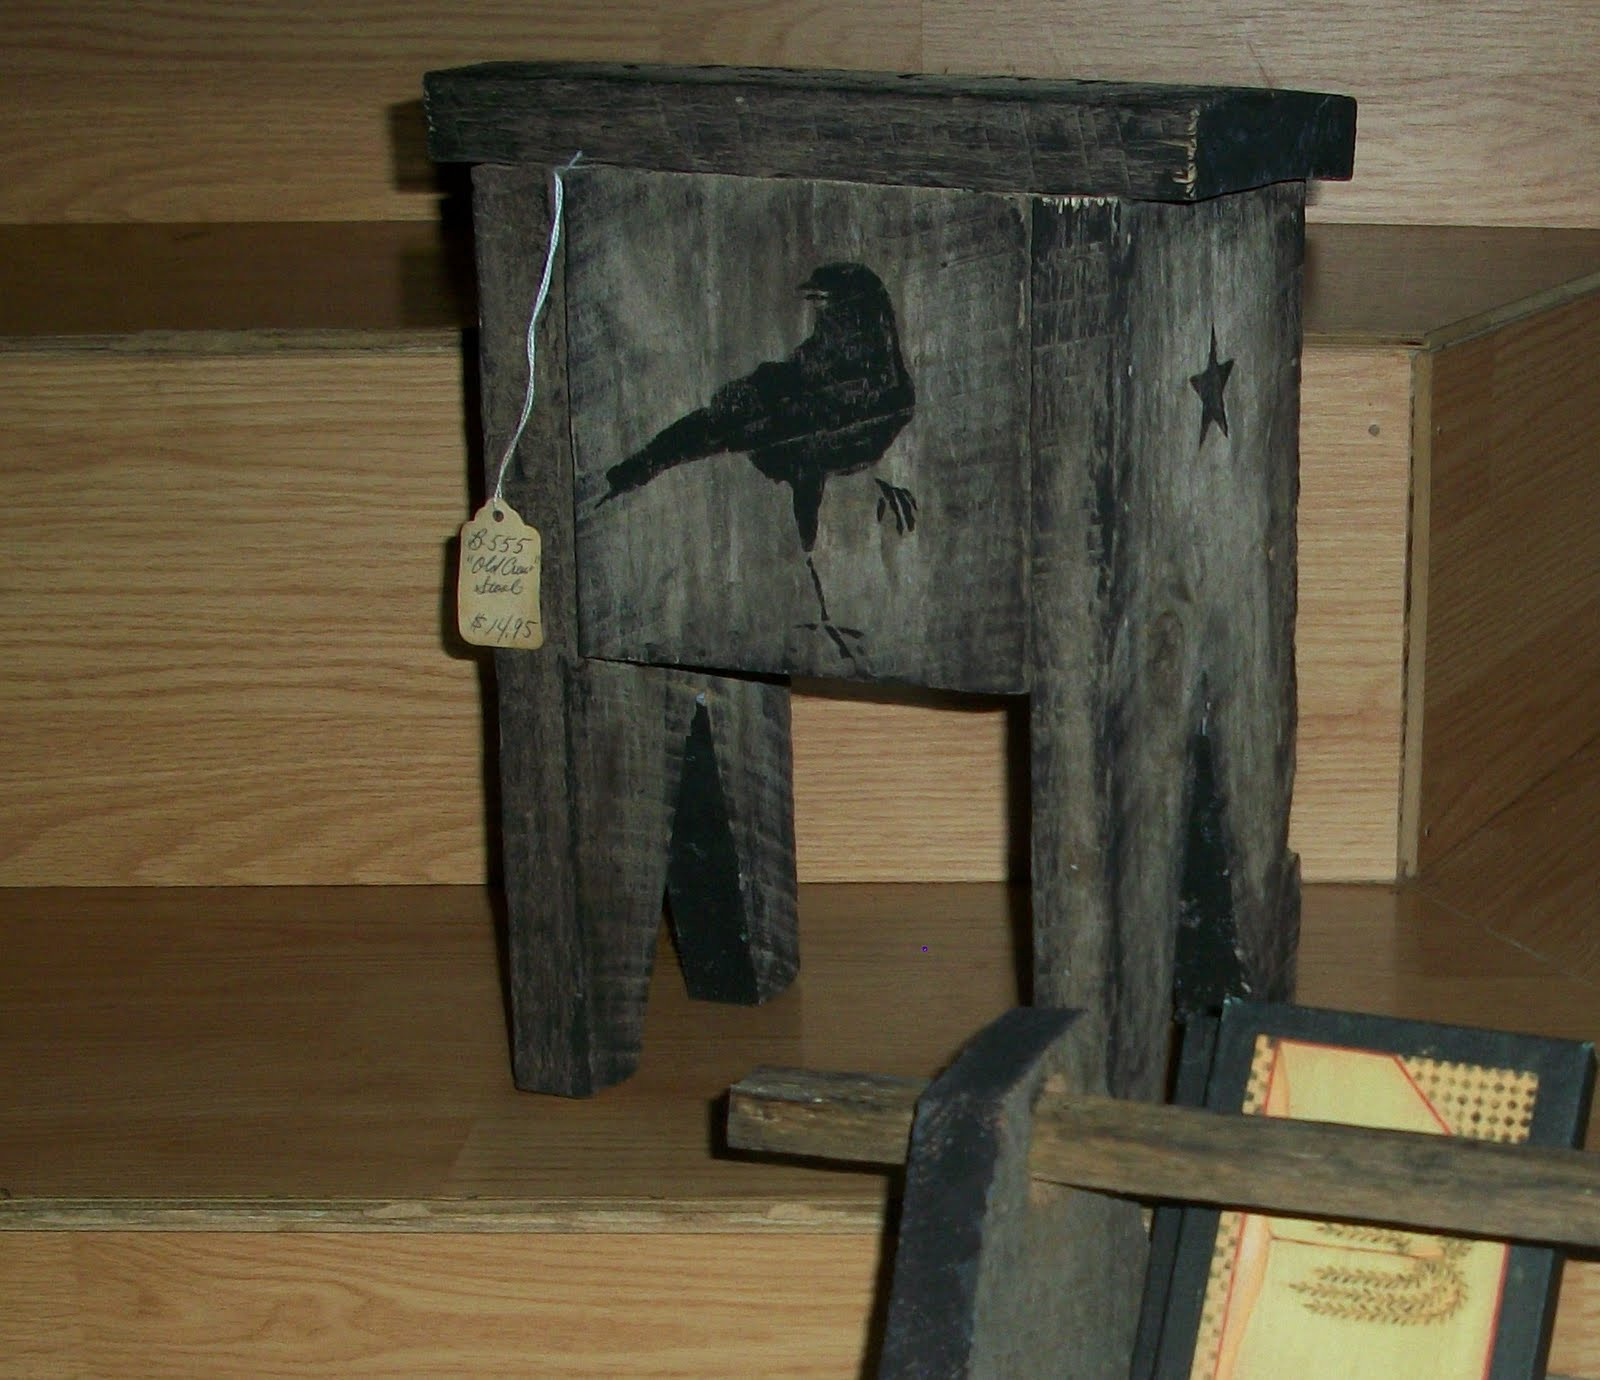 Best ideas about Wood Craft Ideas To Make . Save or Pin Booth 555 PRIMITIVE BARN WOOD STOOL with Old Crow Now.